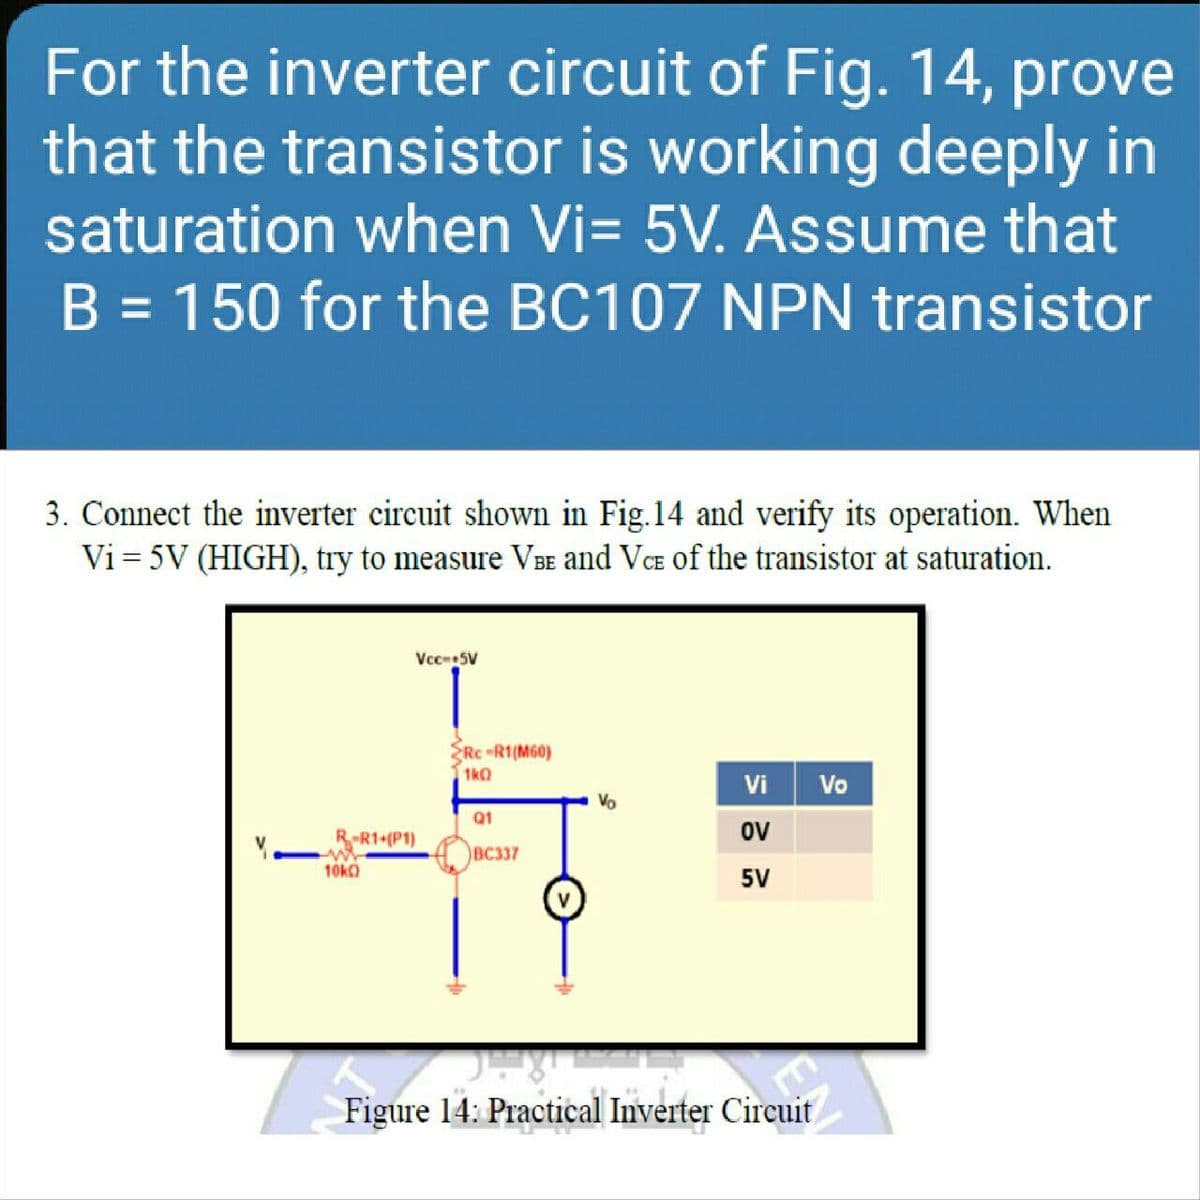 For the inverter circuit of Fig. 14, prove
that the transistor is working deeply in
saturation when Vi= 5V. Assume that
B = 150 for the BC107 NPN transistor
3. Connect the inverter circuit shown in Fig.14 and verify its operation. When
Vi = 5V (HIGH), try to measure VBe and VCE of the transistor at saturation.
Vcc5V
Rc-R1(M60)
1kO
Vi
Vo
Vo
Q1
R-R1 (P1)
ov
BC337
10ka
5V
Figure 14: Practical Inverter Circuit
